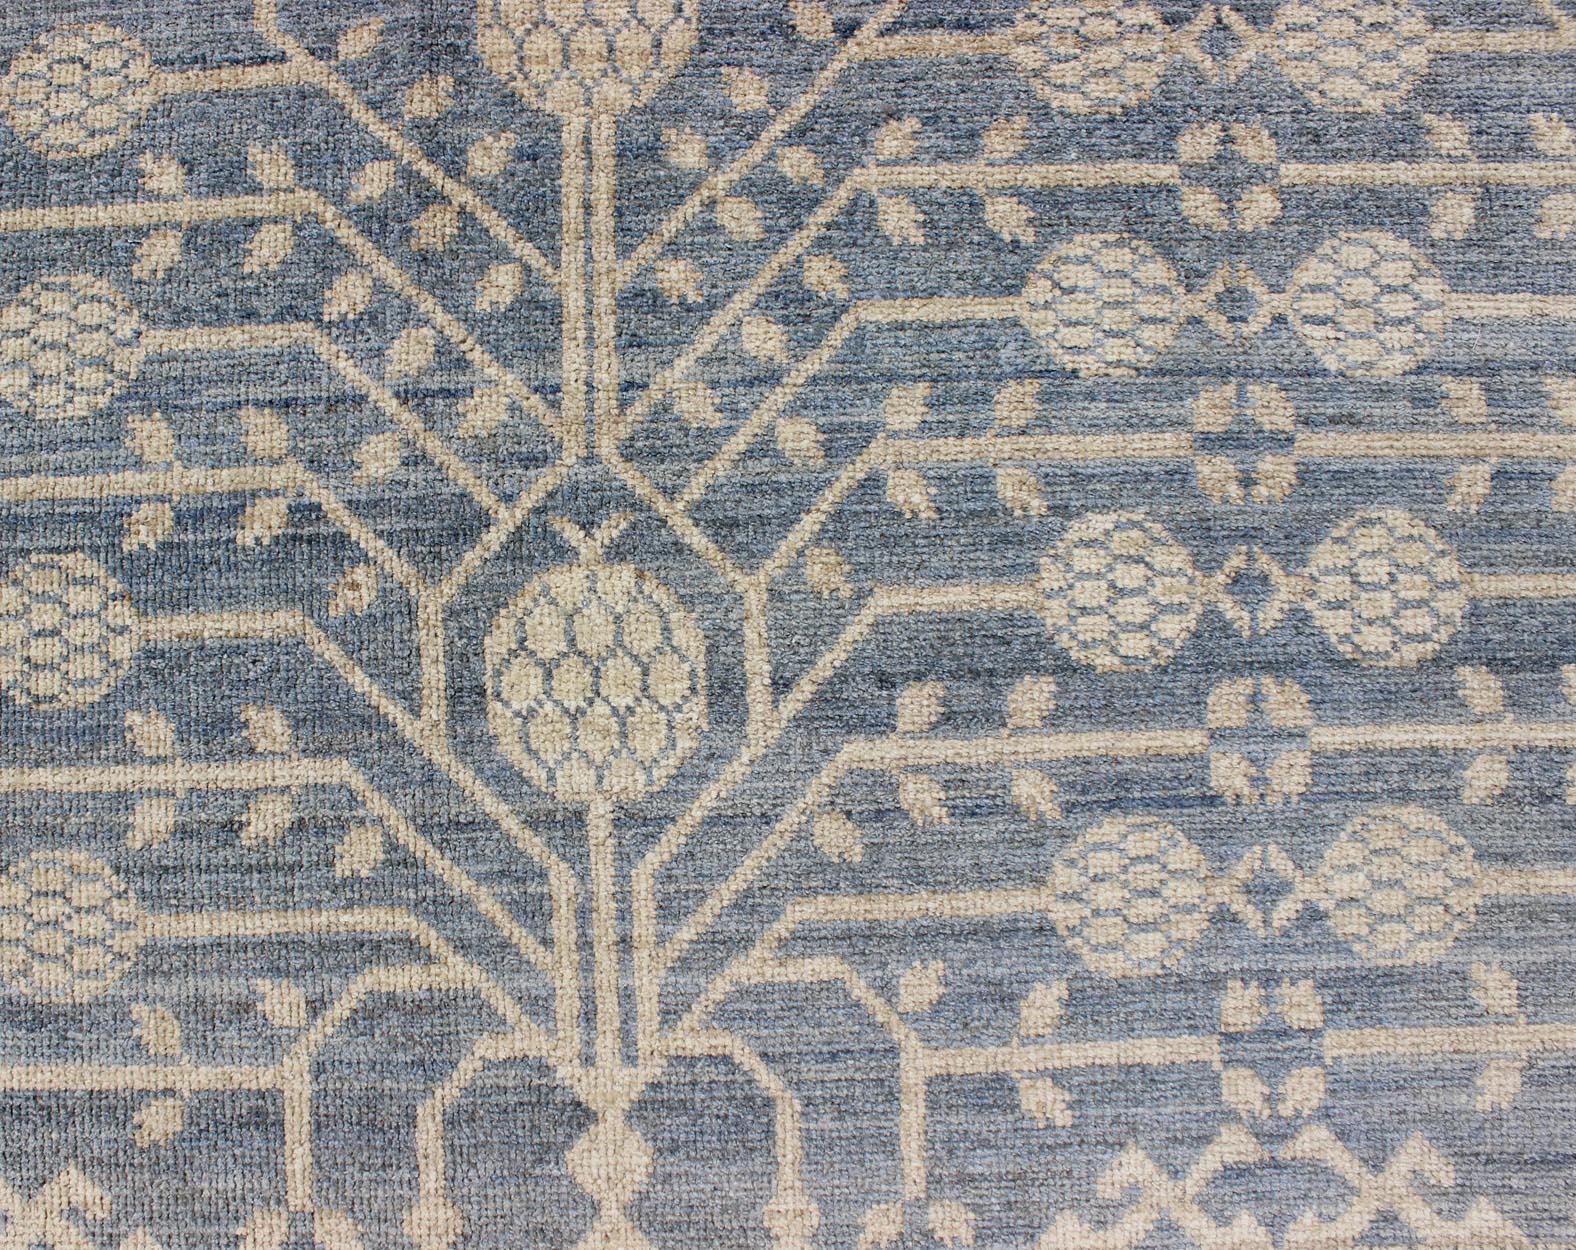 Khotan Design Rug with All-Over Pomegranate Pattern in Blue, Tan & Taupe For Sale 1